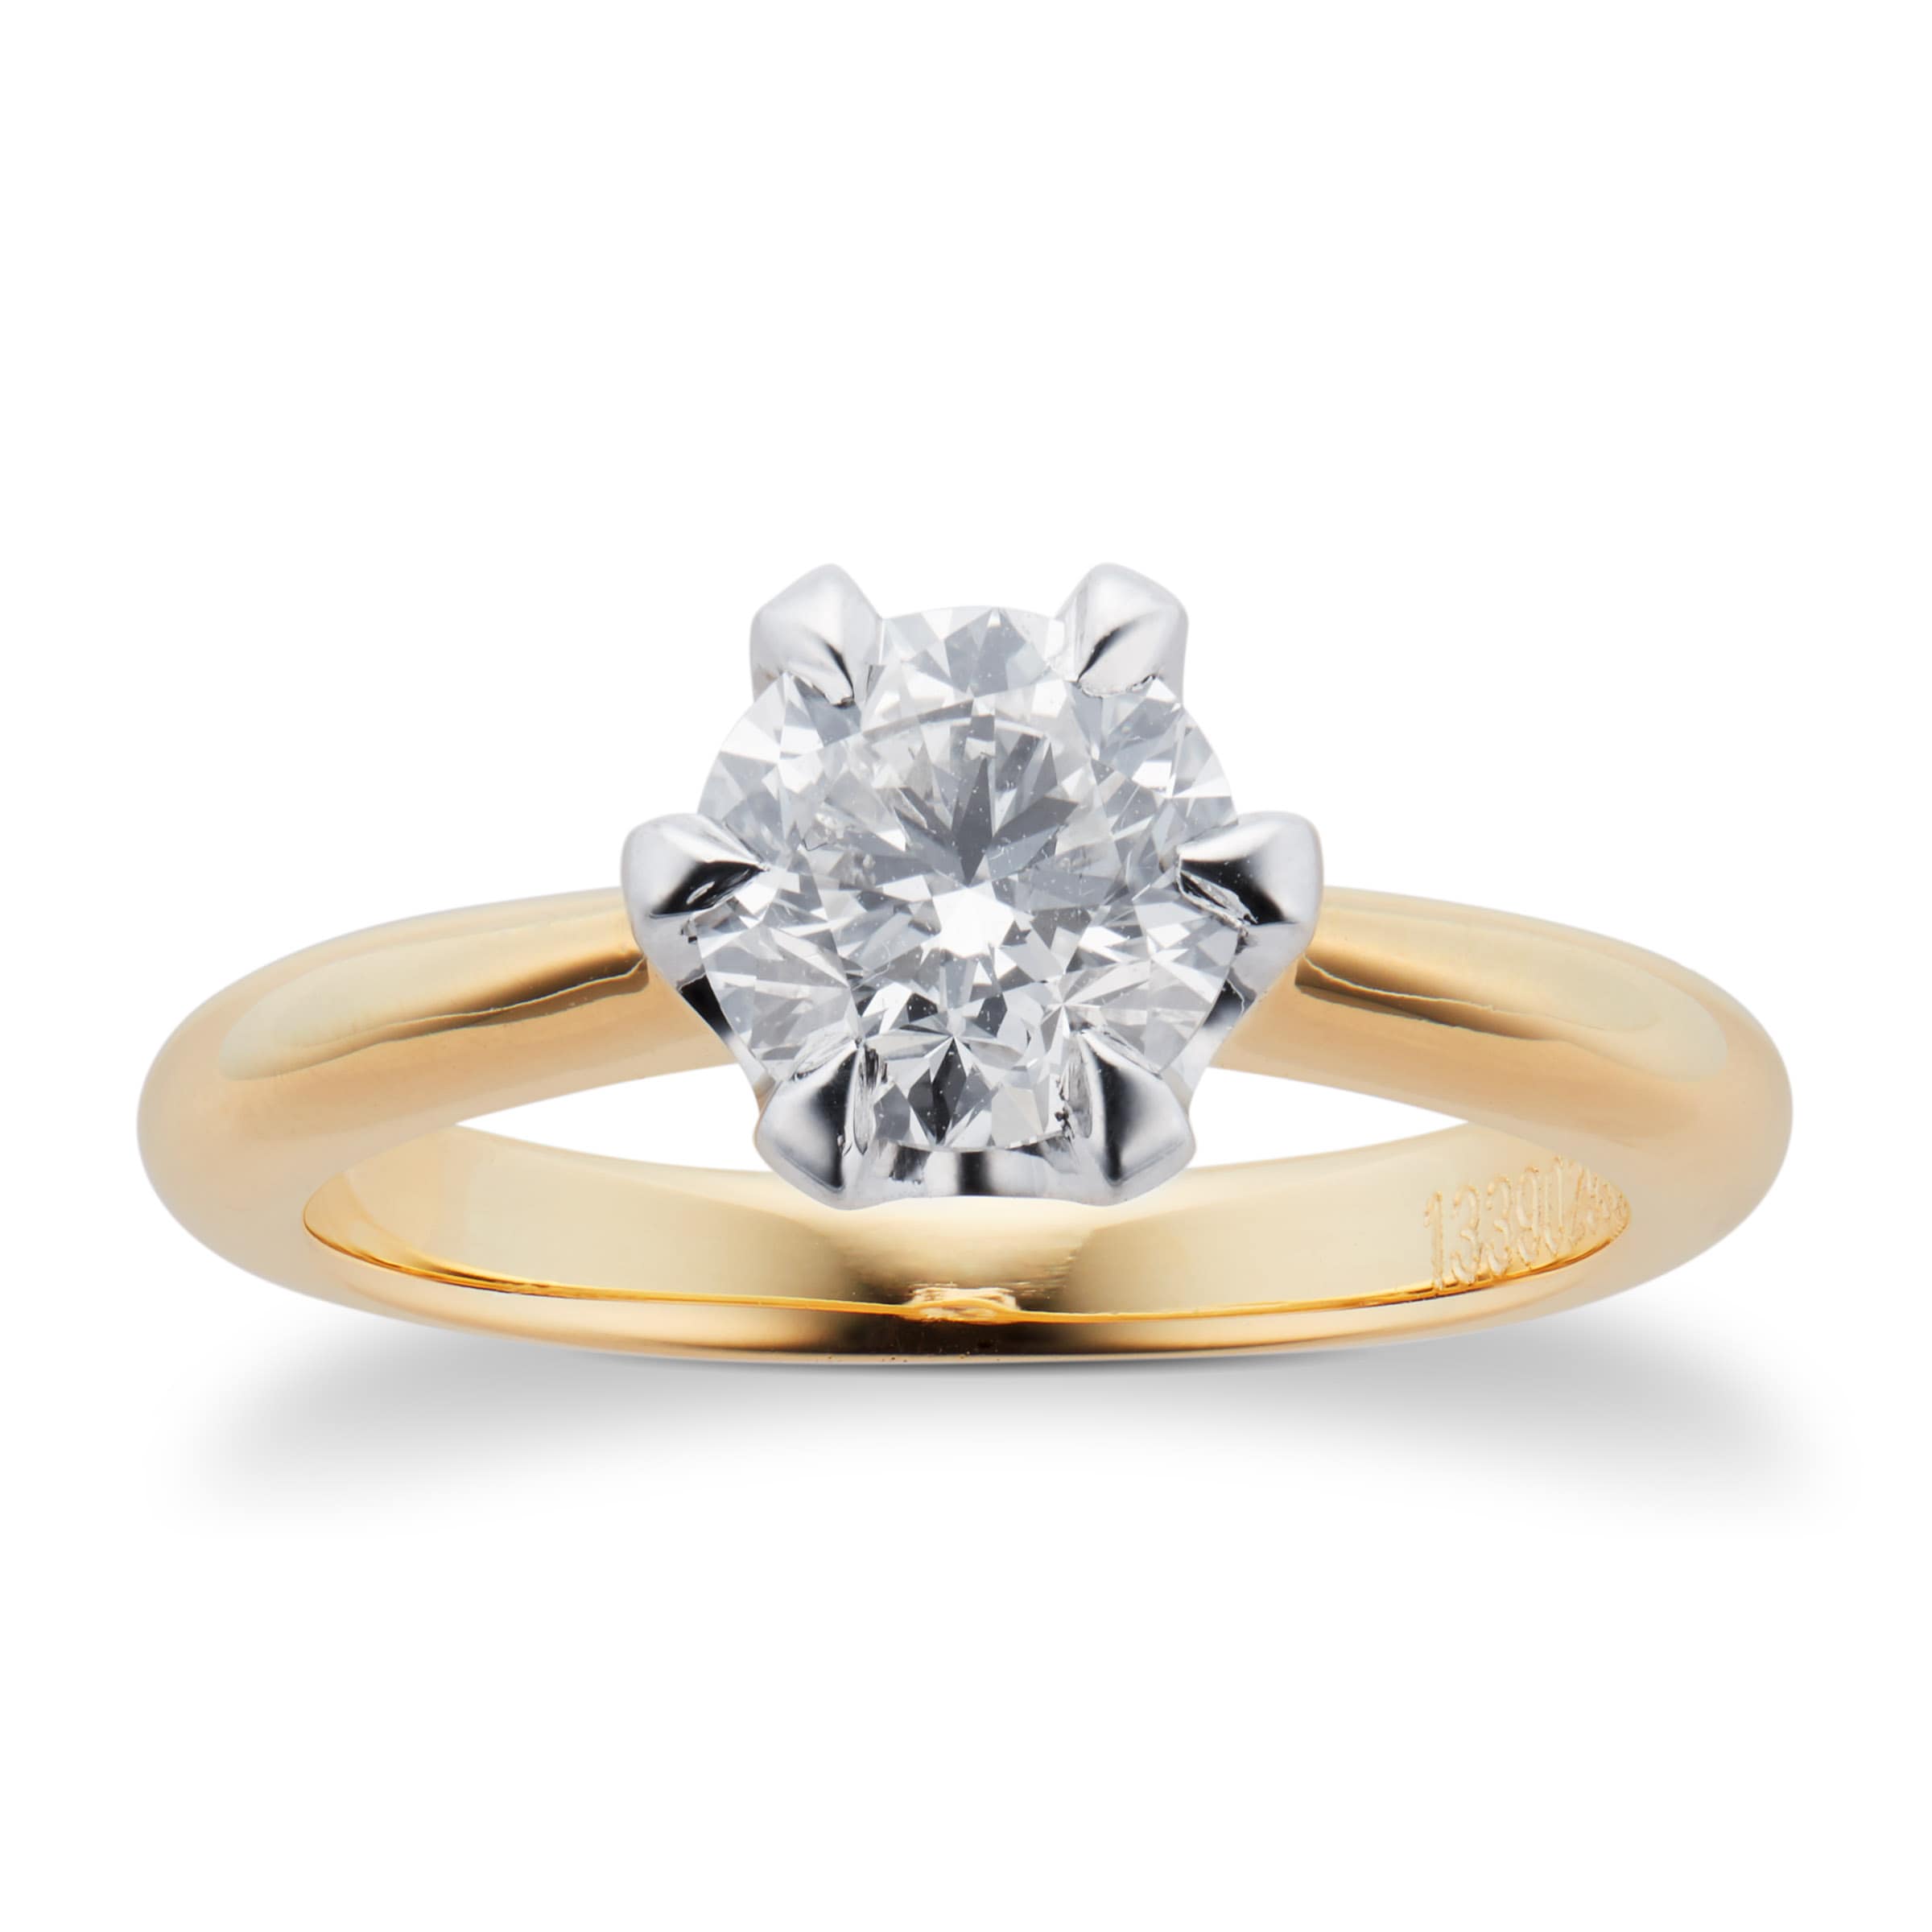 Hermione 18ct Yellow Gold 1.00ct Diamond Engagement Ring - Ring Size K